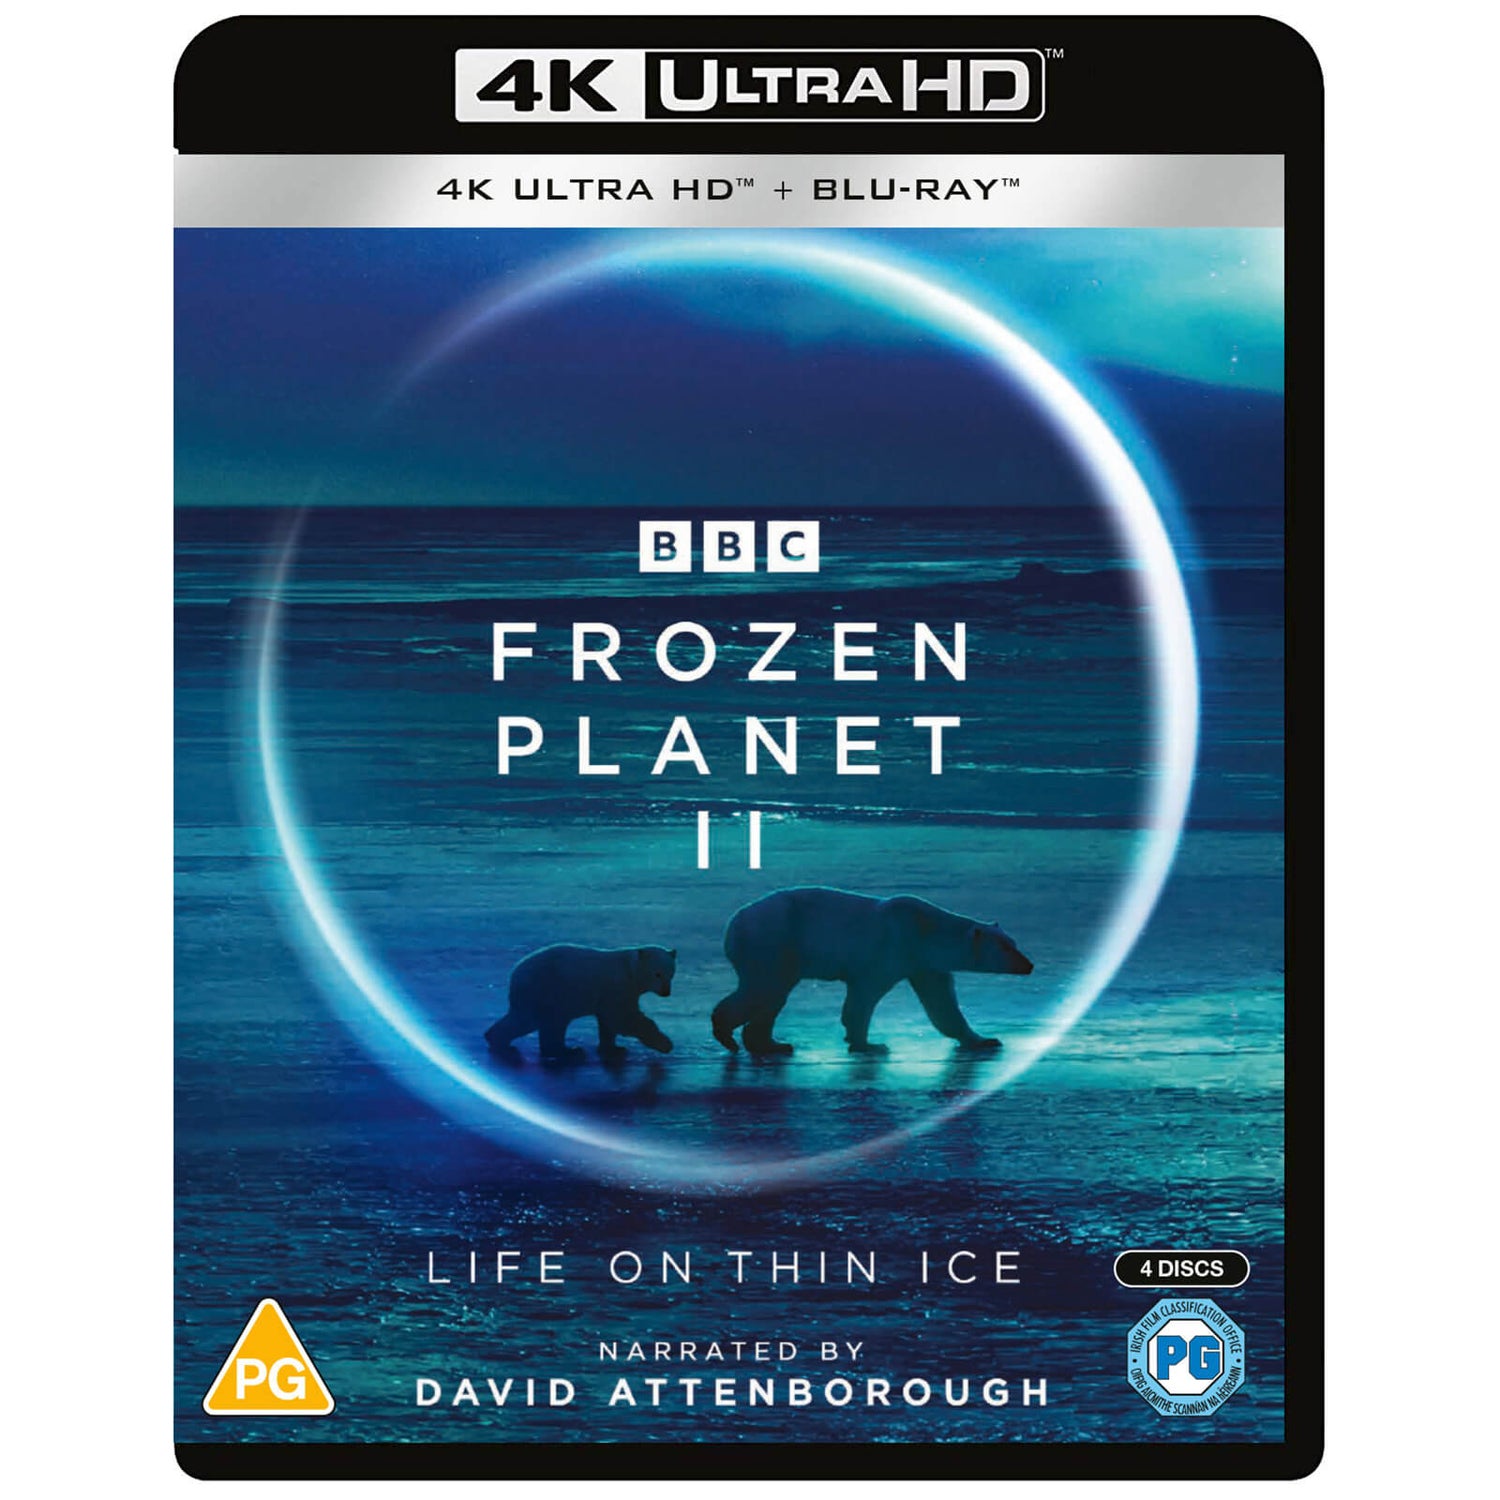 BBC Earth builds partnership with Minecraft for Frozen Planet II